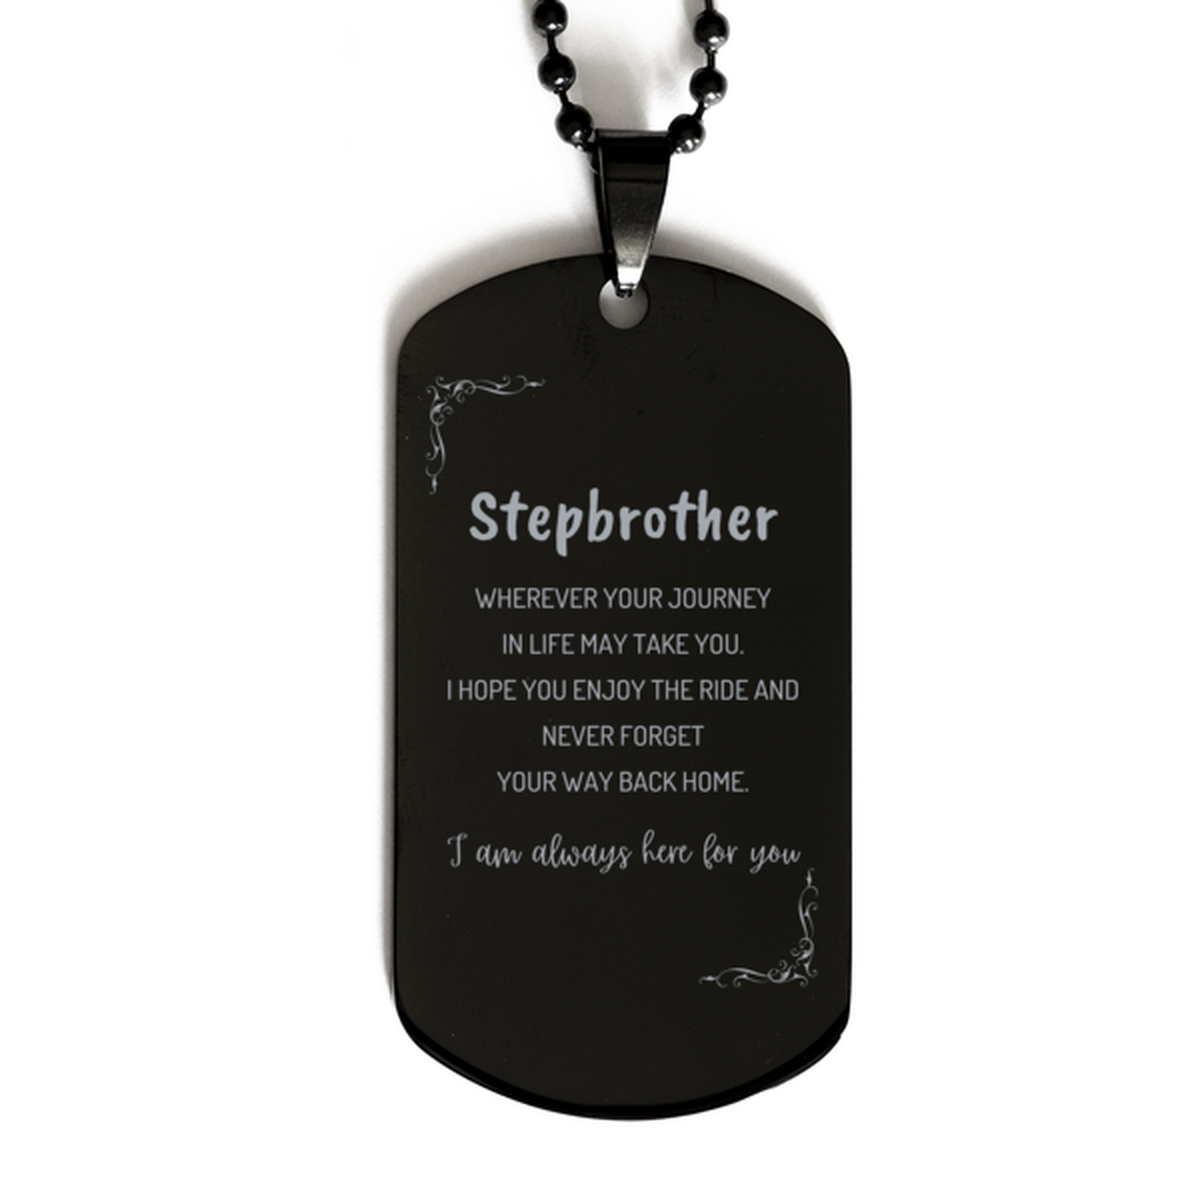 Stepbrother wherever your journey in life may take you, I am always here for you Stepbrother Black Dog Tag, Awesome Christmas Gifts For Stepbrother, Stepbrother Birthday Gifts for Men Women Family Loved One